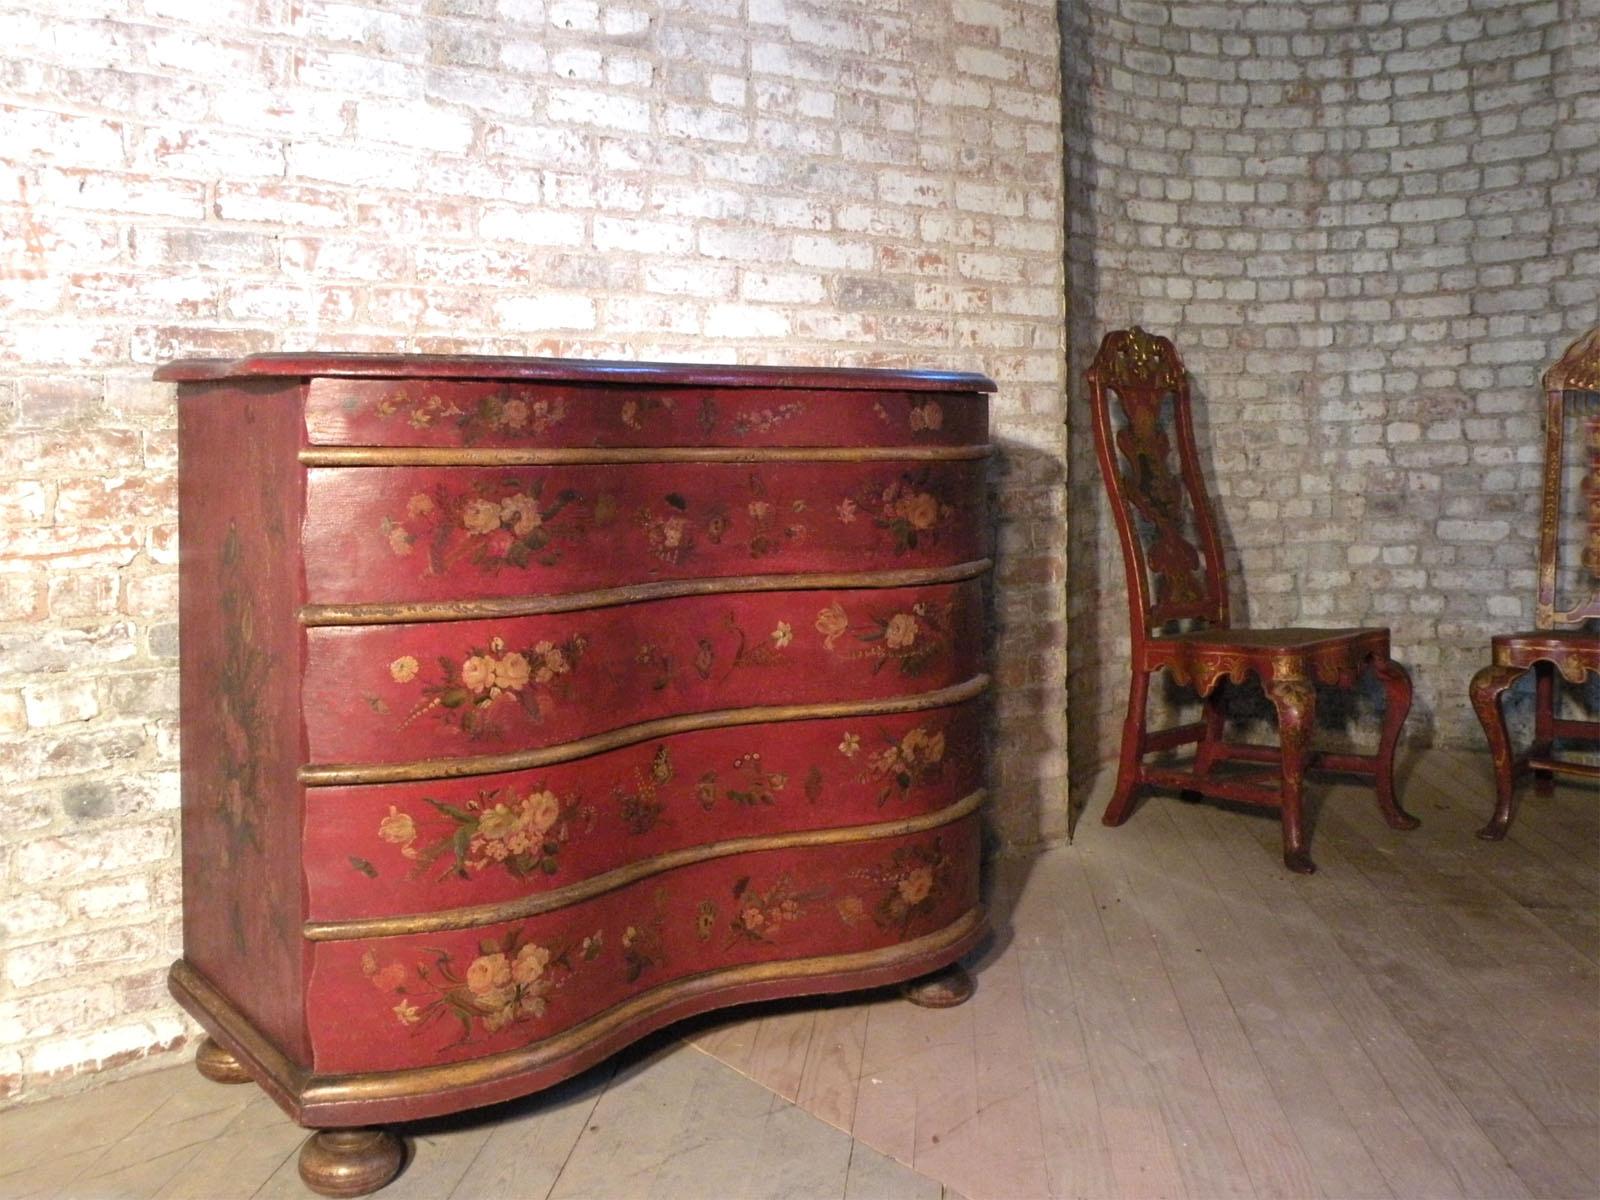 Large Floral Painted 18th Century Commode of German Origin with five drawers made of oak), serpentine front, on bun feet. Charming and very decorative with the red paint nicely distressed for a relaxed, lived-in look - or to be retouched for a more